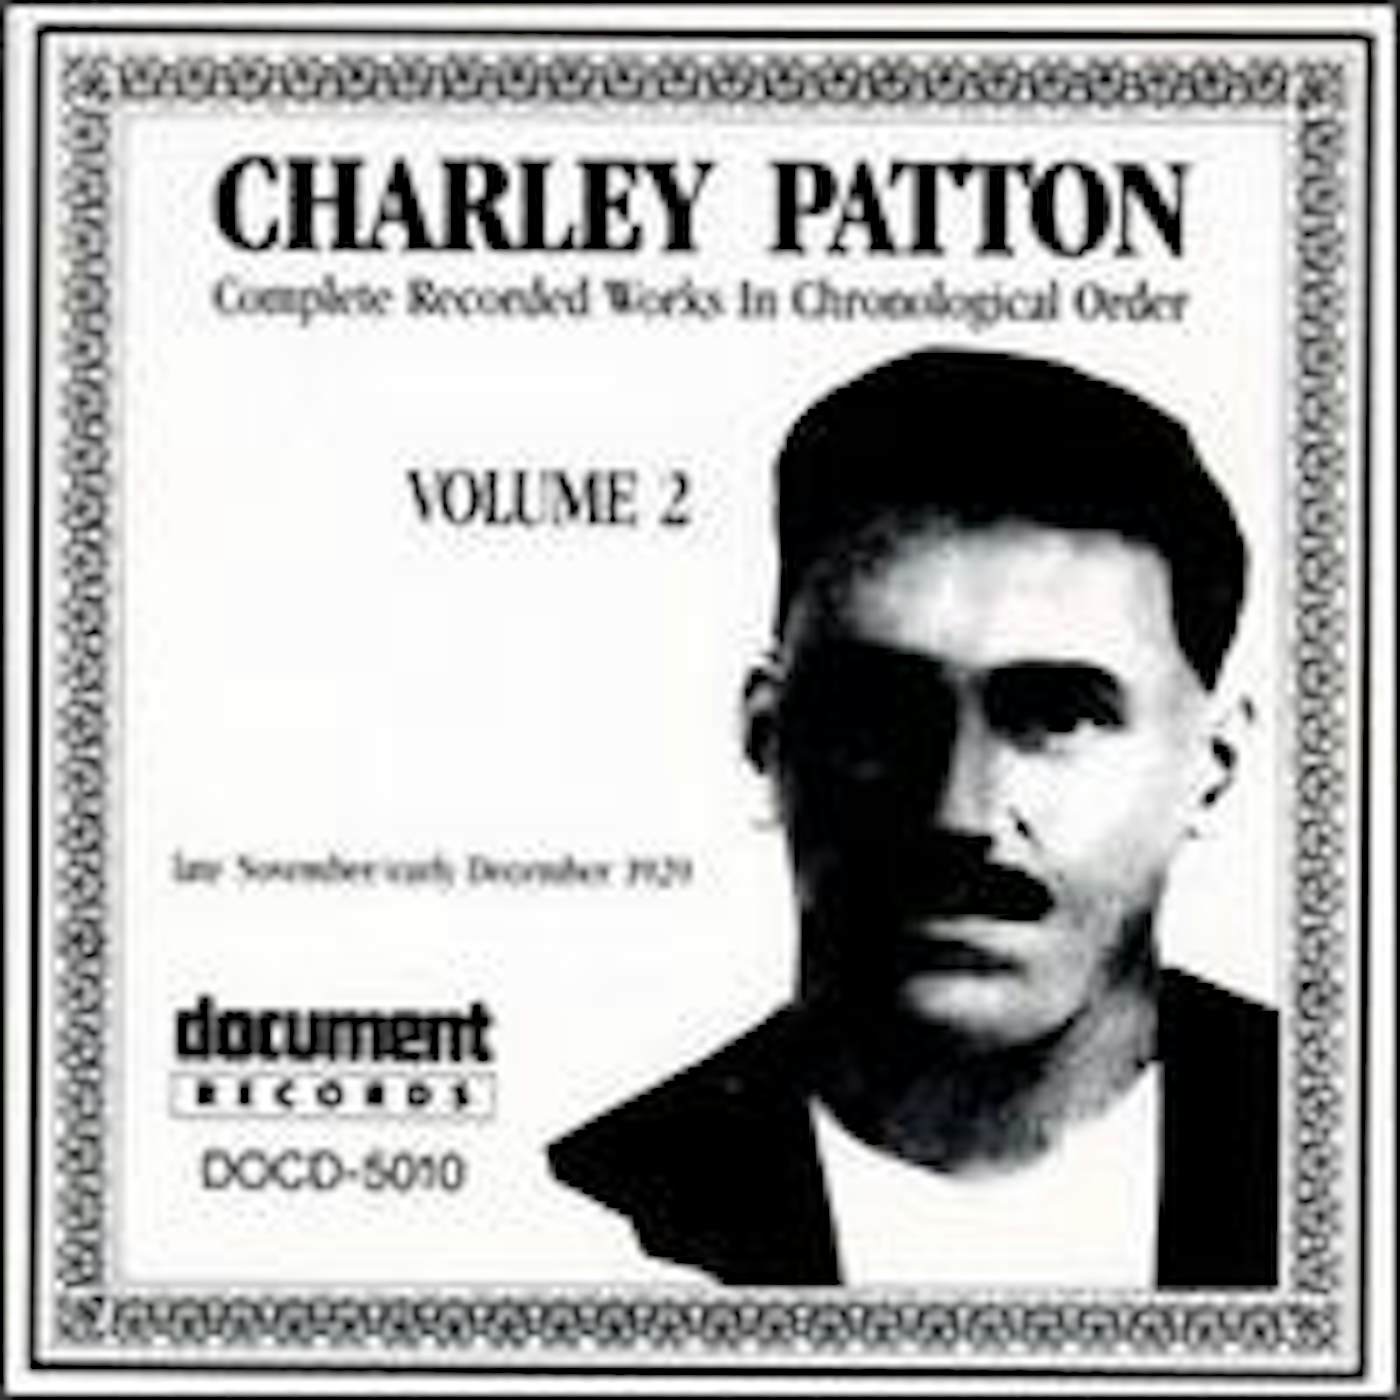 Charley Patton COMPLETE RECORDINGS 1929-1934 VOL. 2 (1929) CD